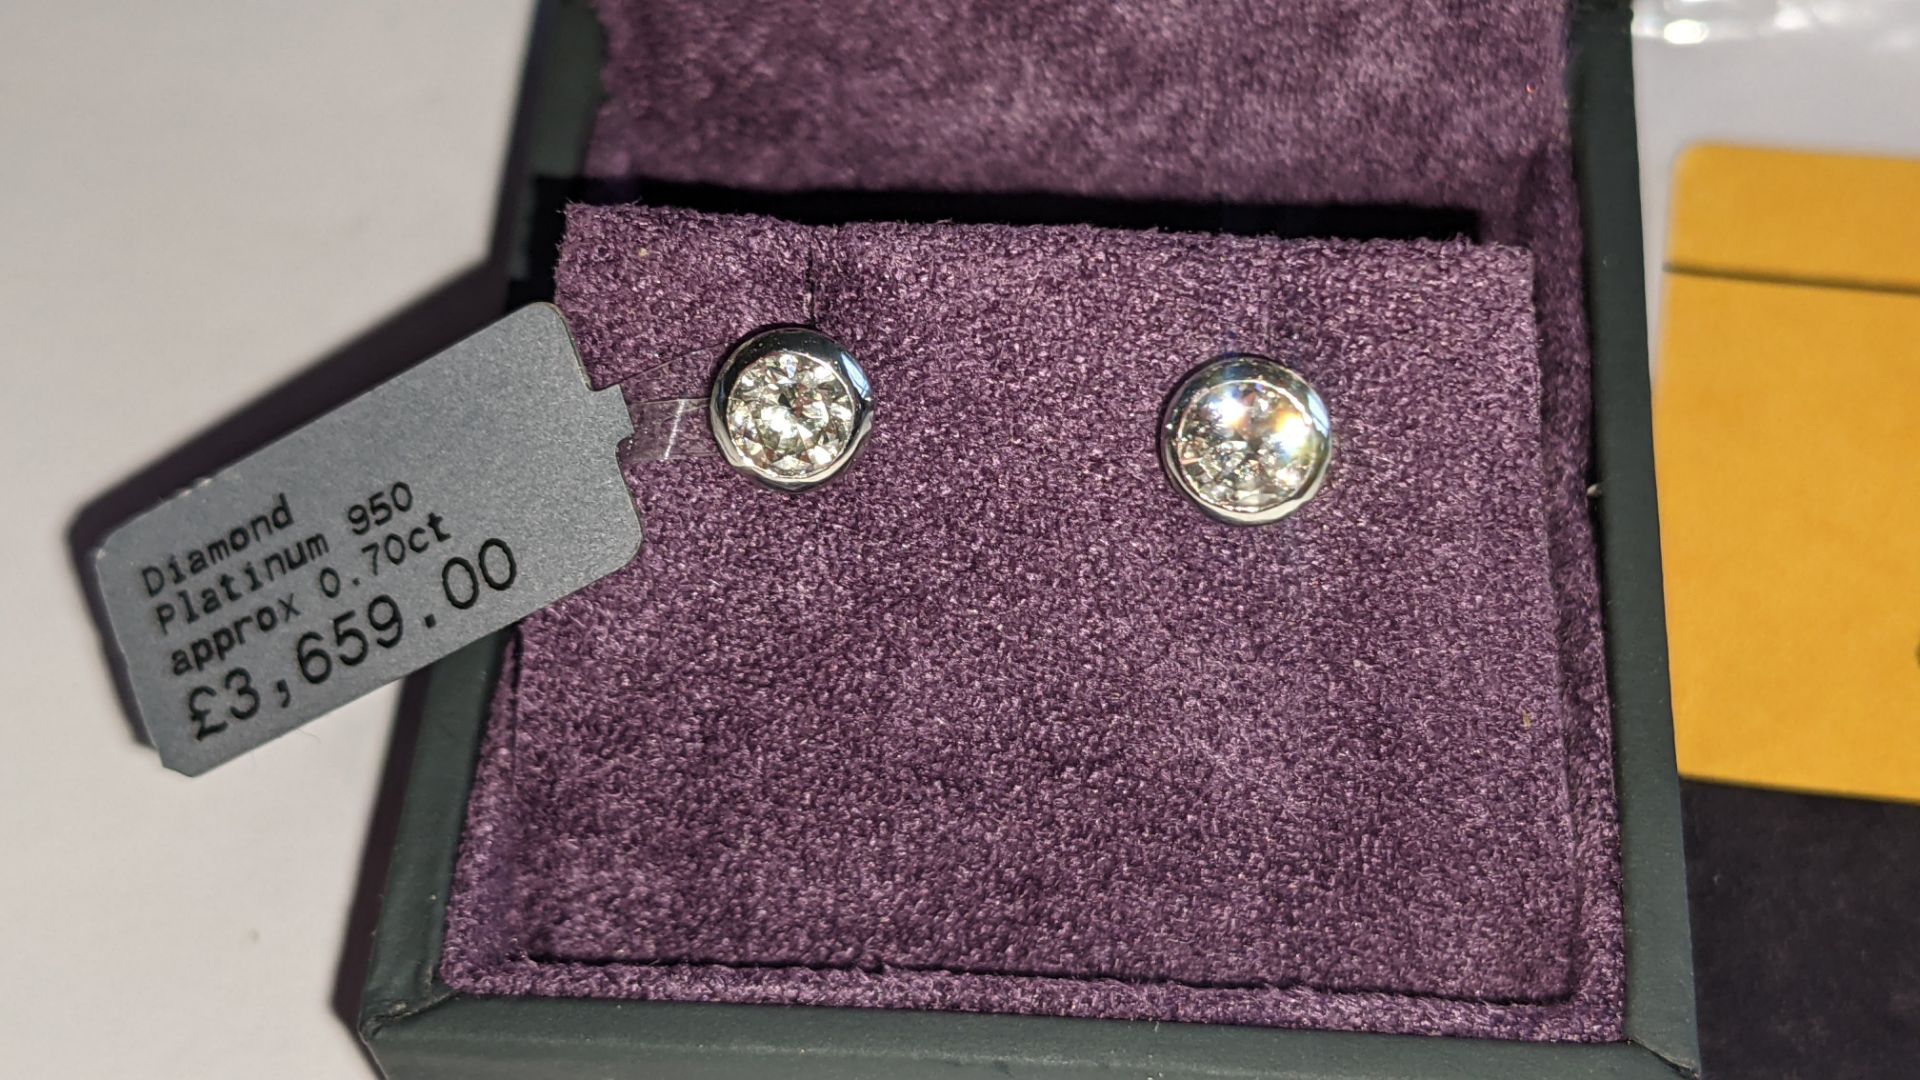 Pair of Platinum 950 & diamond earrings with total ctw of approx. 0.70ct RRP £3,659 - Image 9 of 10